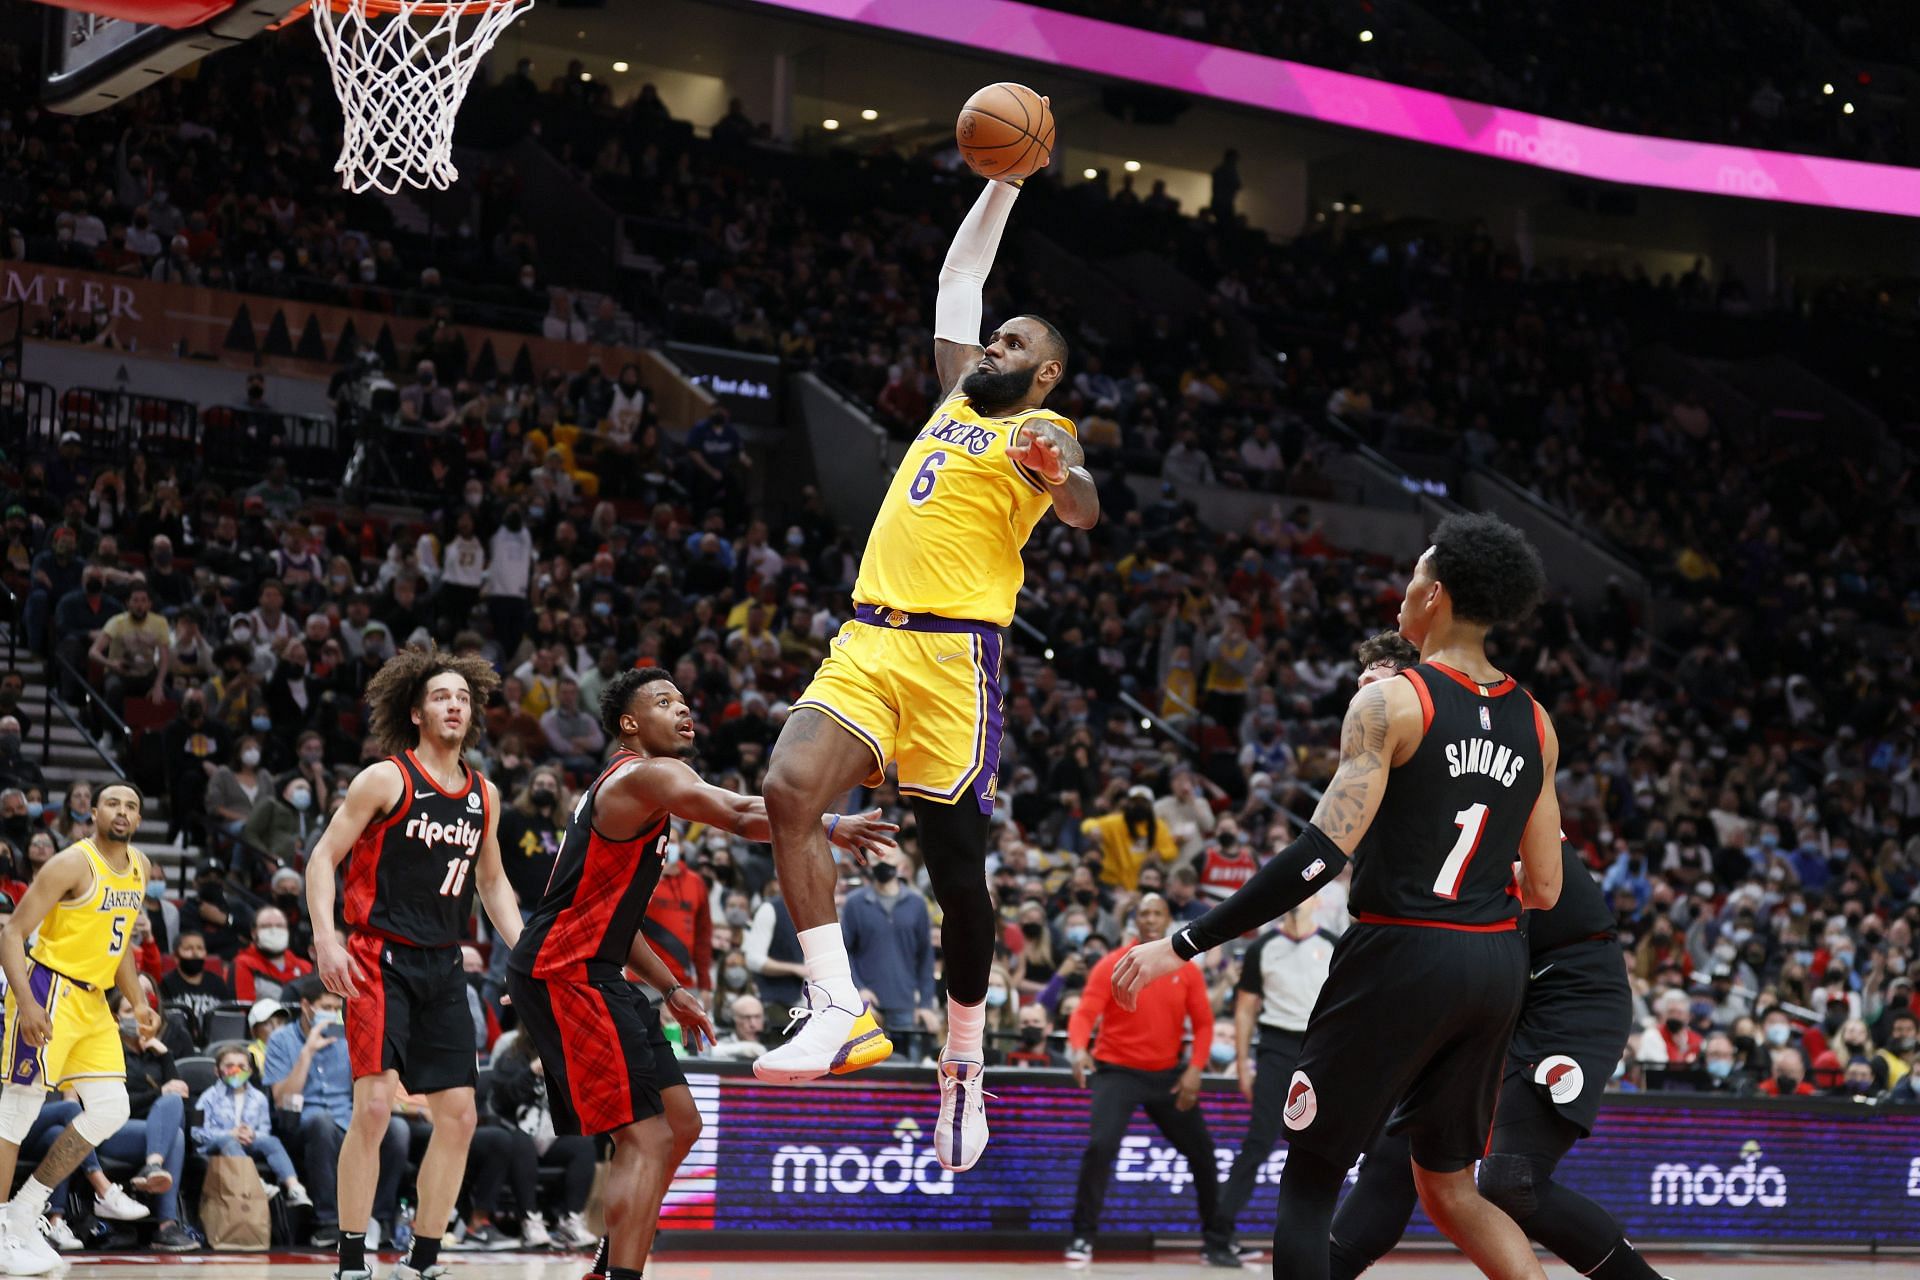 Los Angeles Lakers vs. Portland Trail Blazers: LeBron James dunking late in the fourth quarter of a devastating loss to Portland